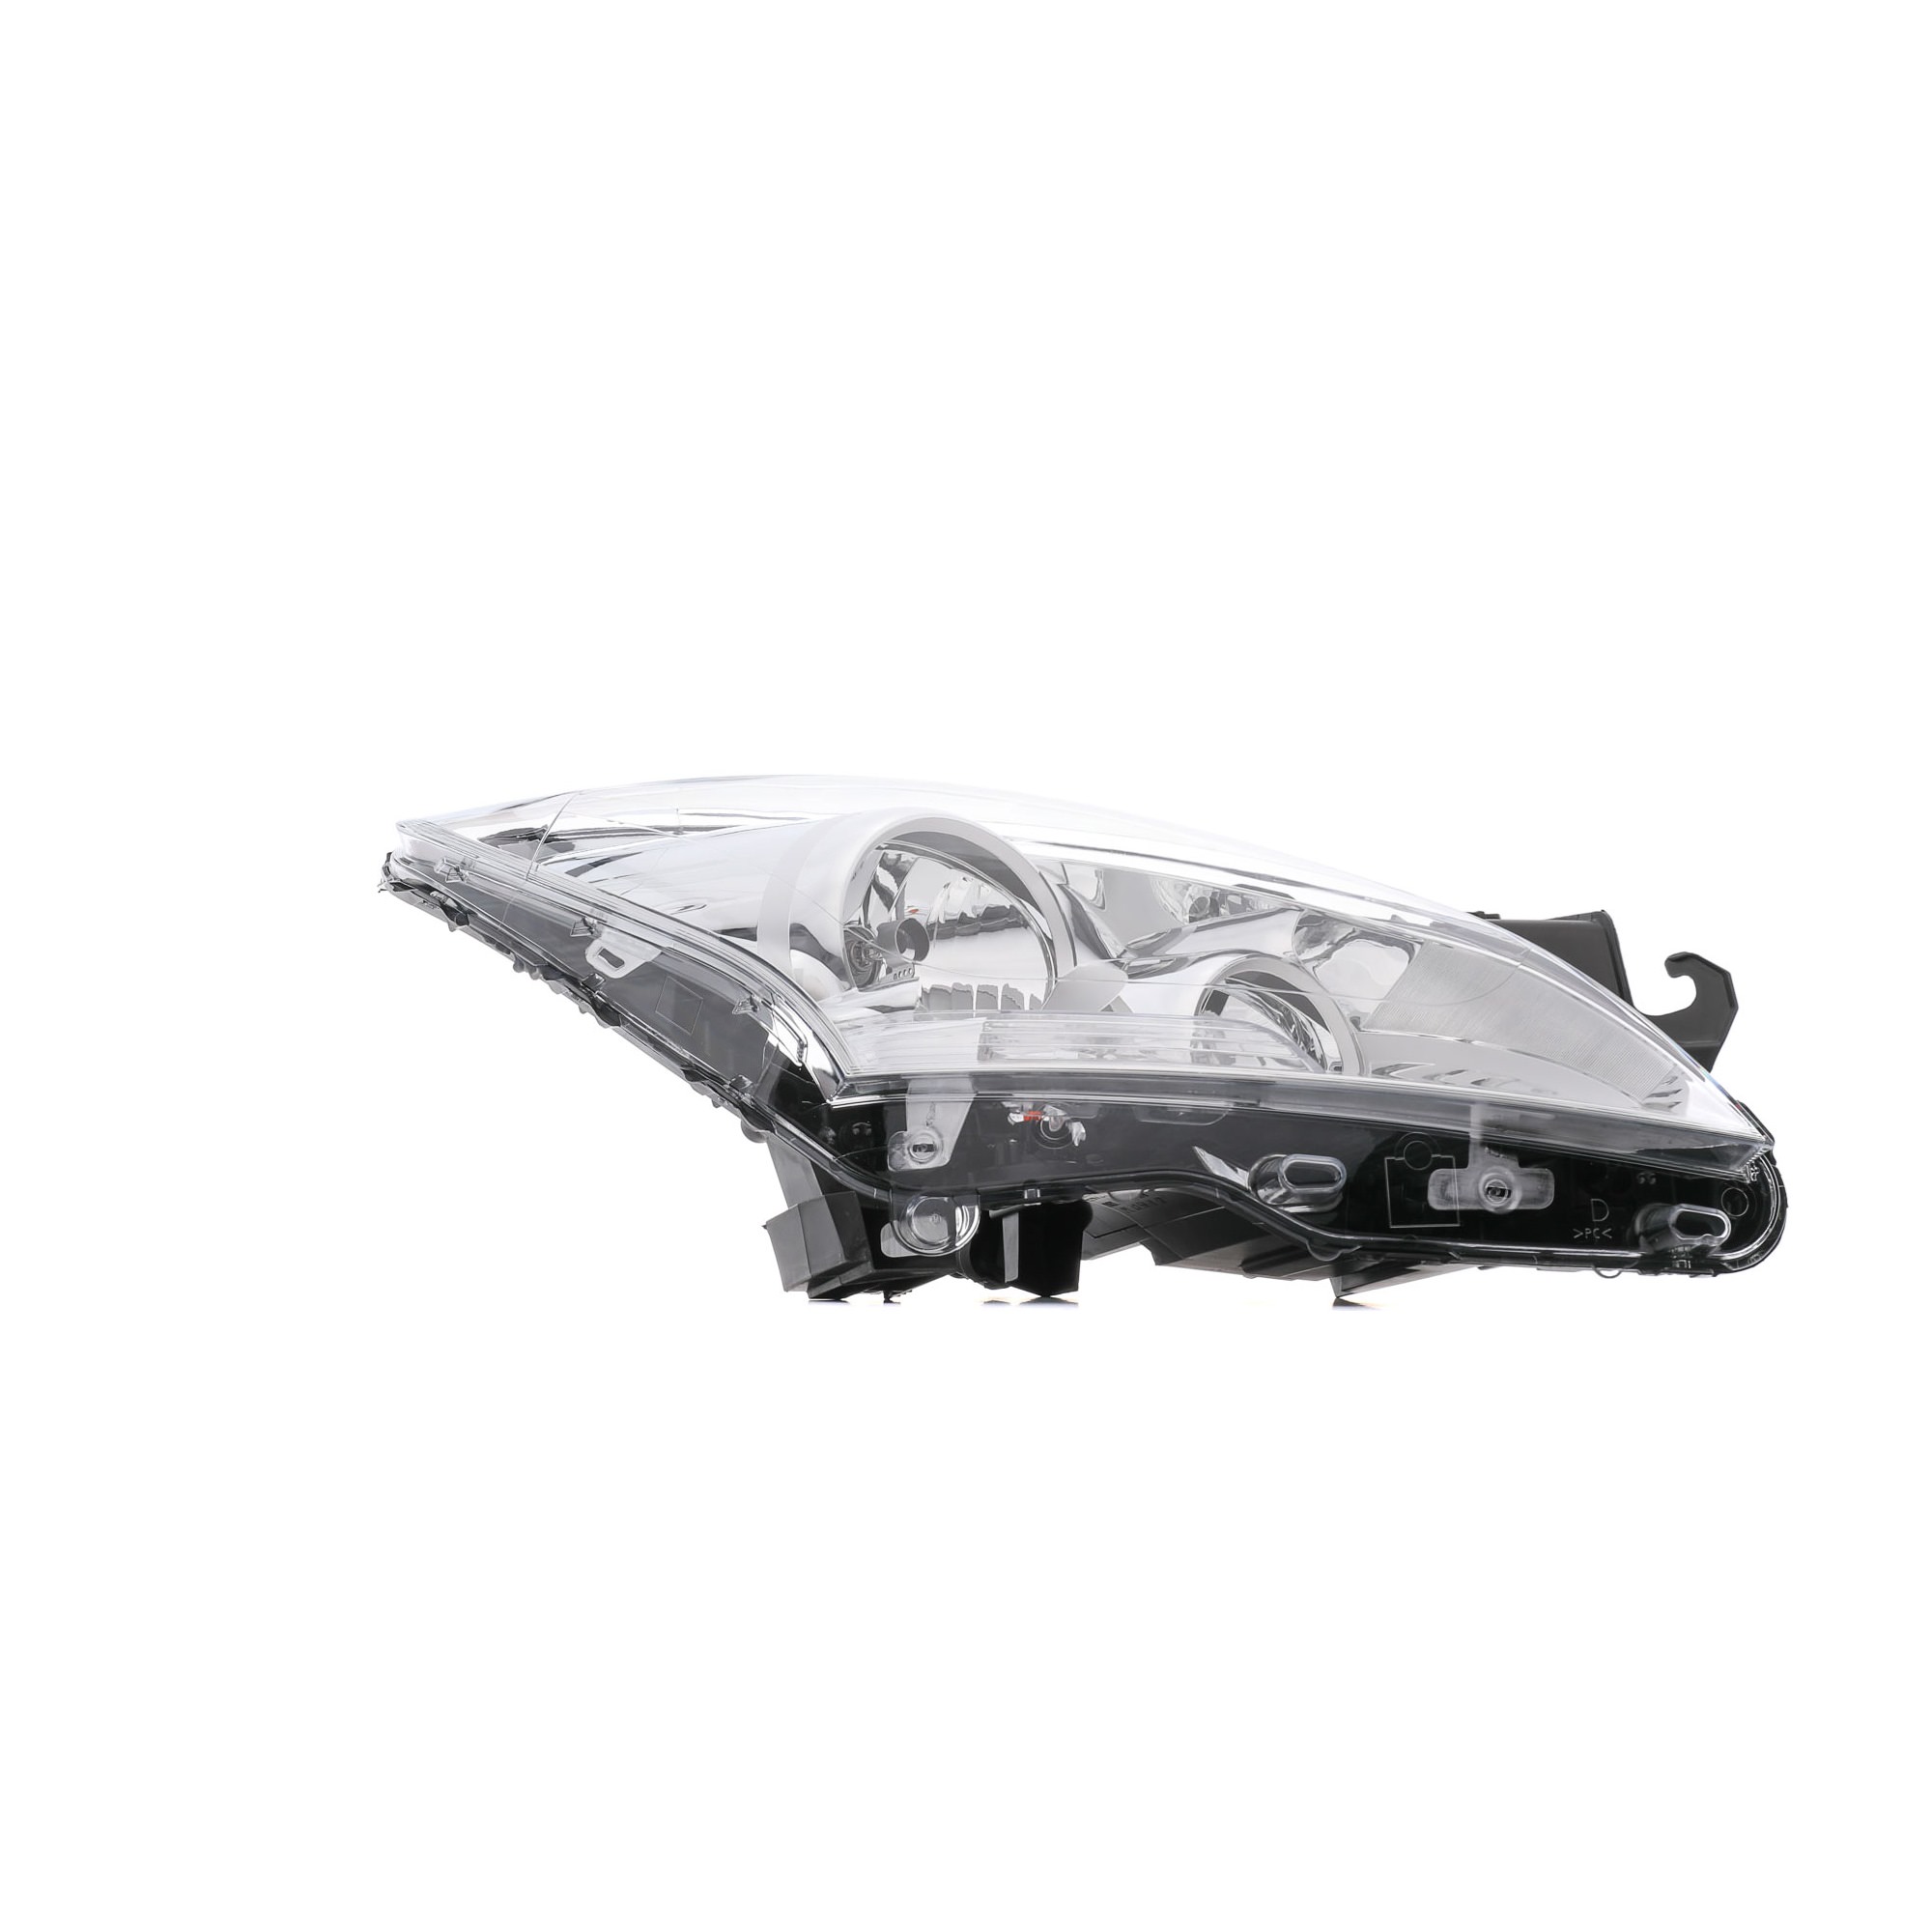 043785 VALEO Headlight ROVER Right, H7, Halogen, transparent, with low beam, with daytime running light, for right-hand traffic, ORIGINAL PART, with motor for headlamp levelling